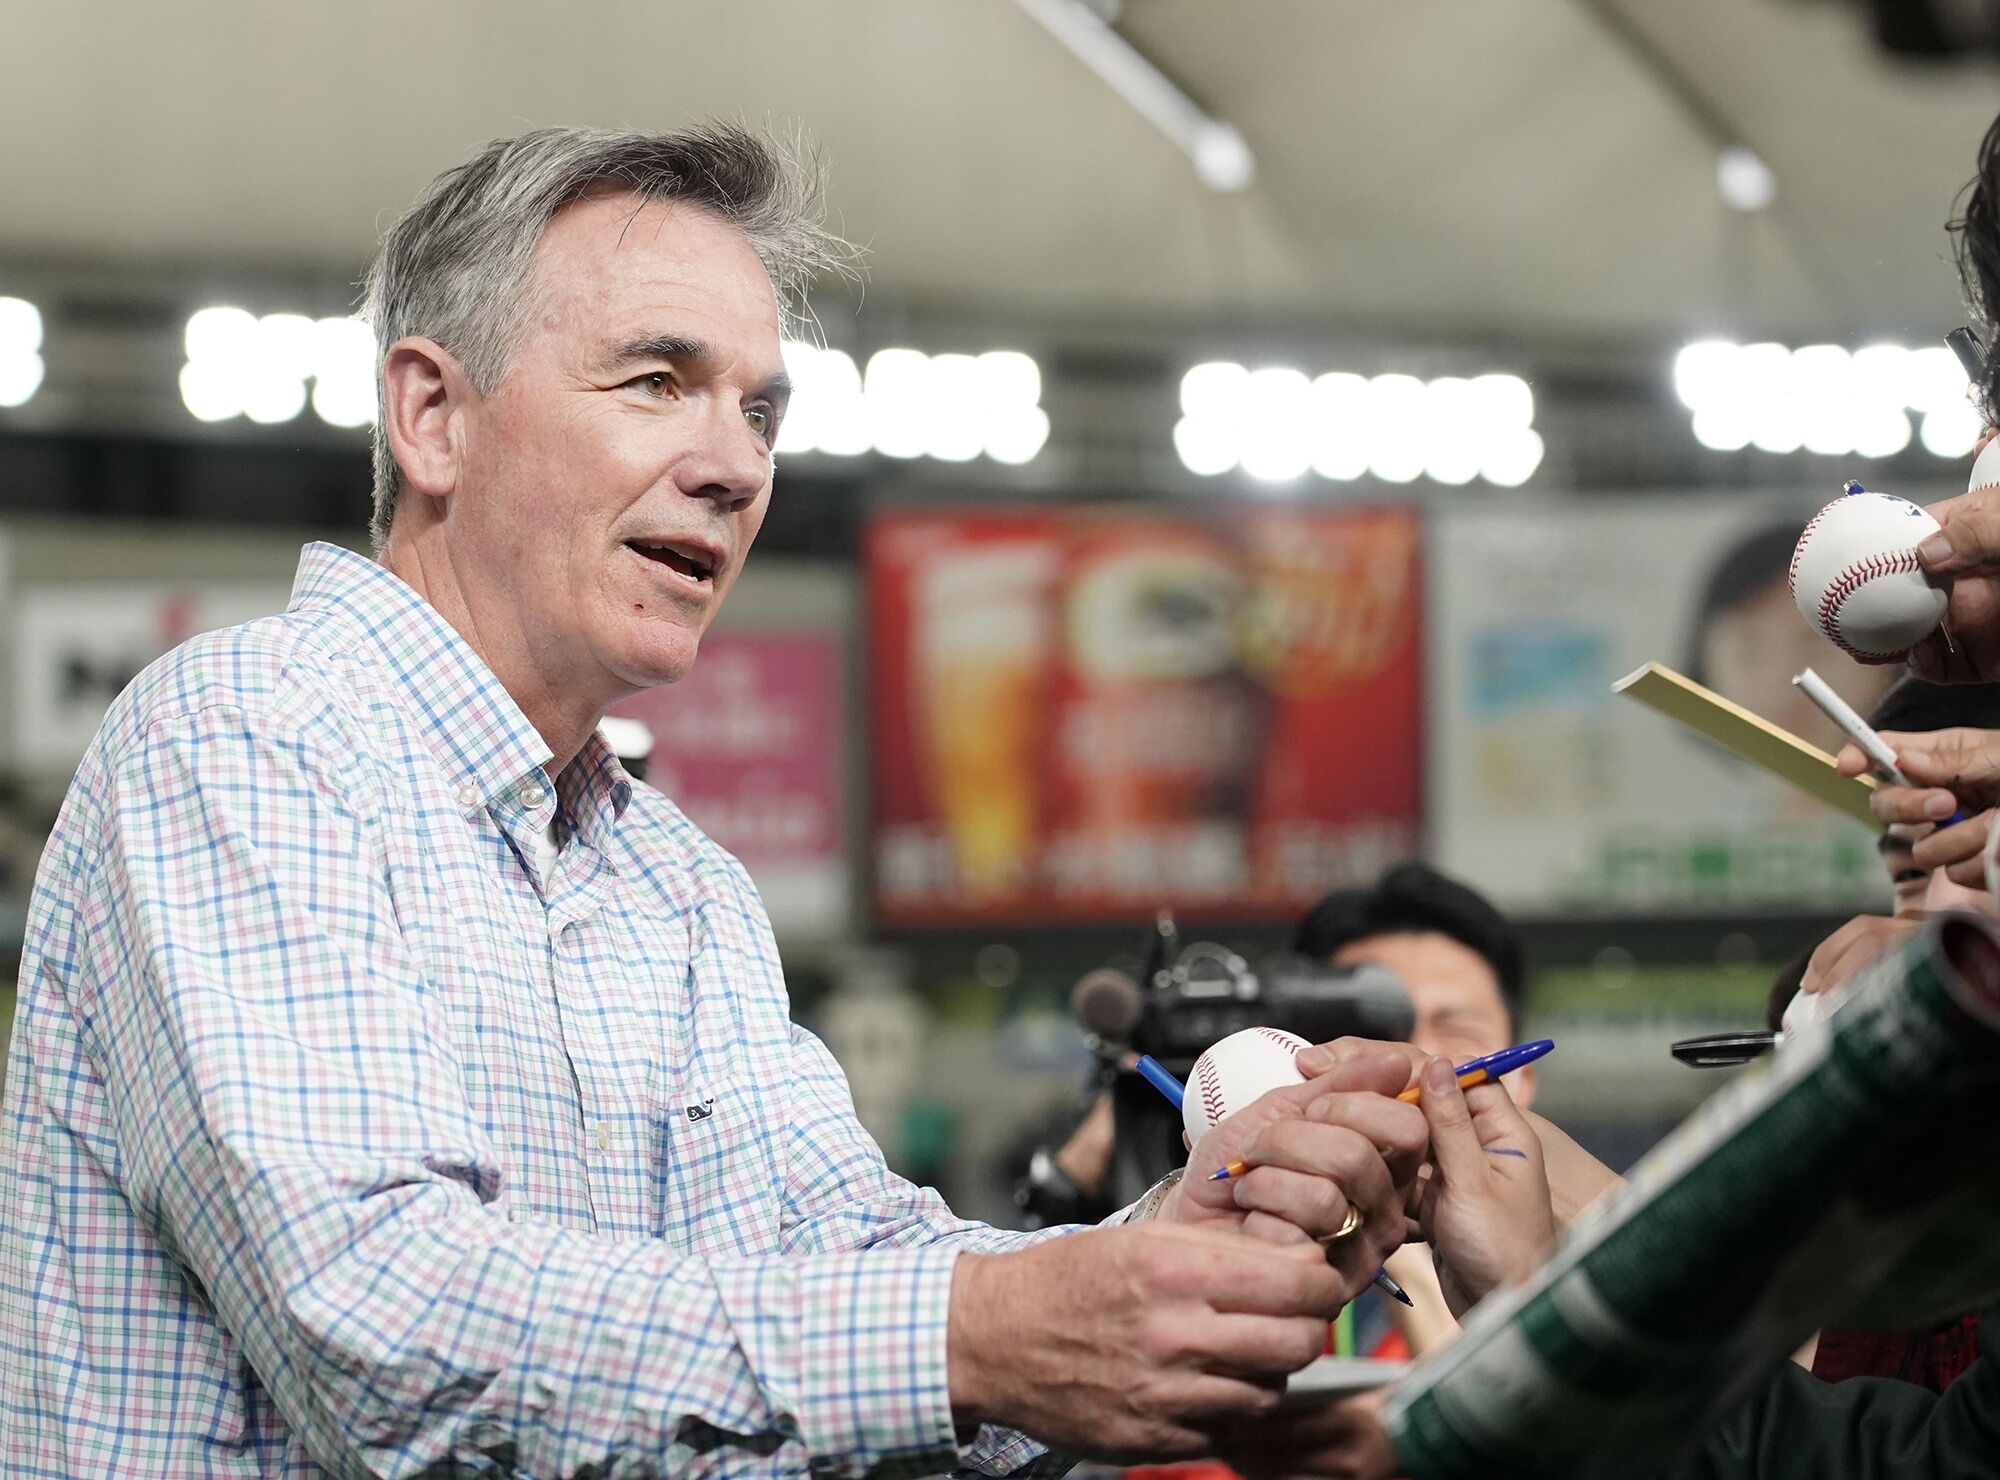 Billy Beane leaves Moneyball behind to refocus on statistical truths, MLB